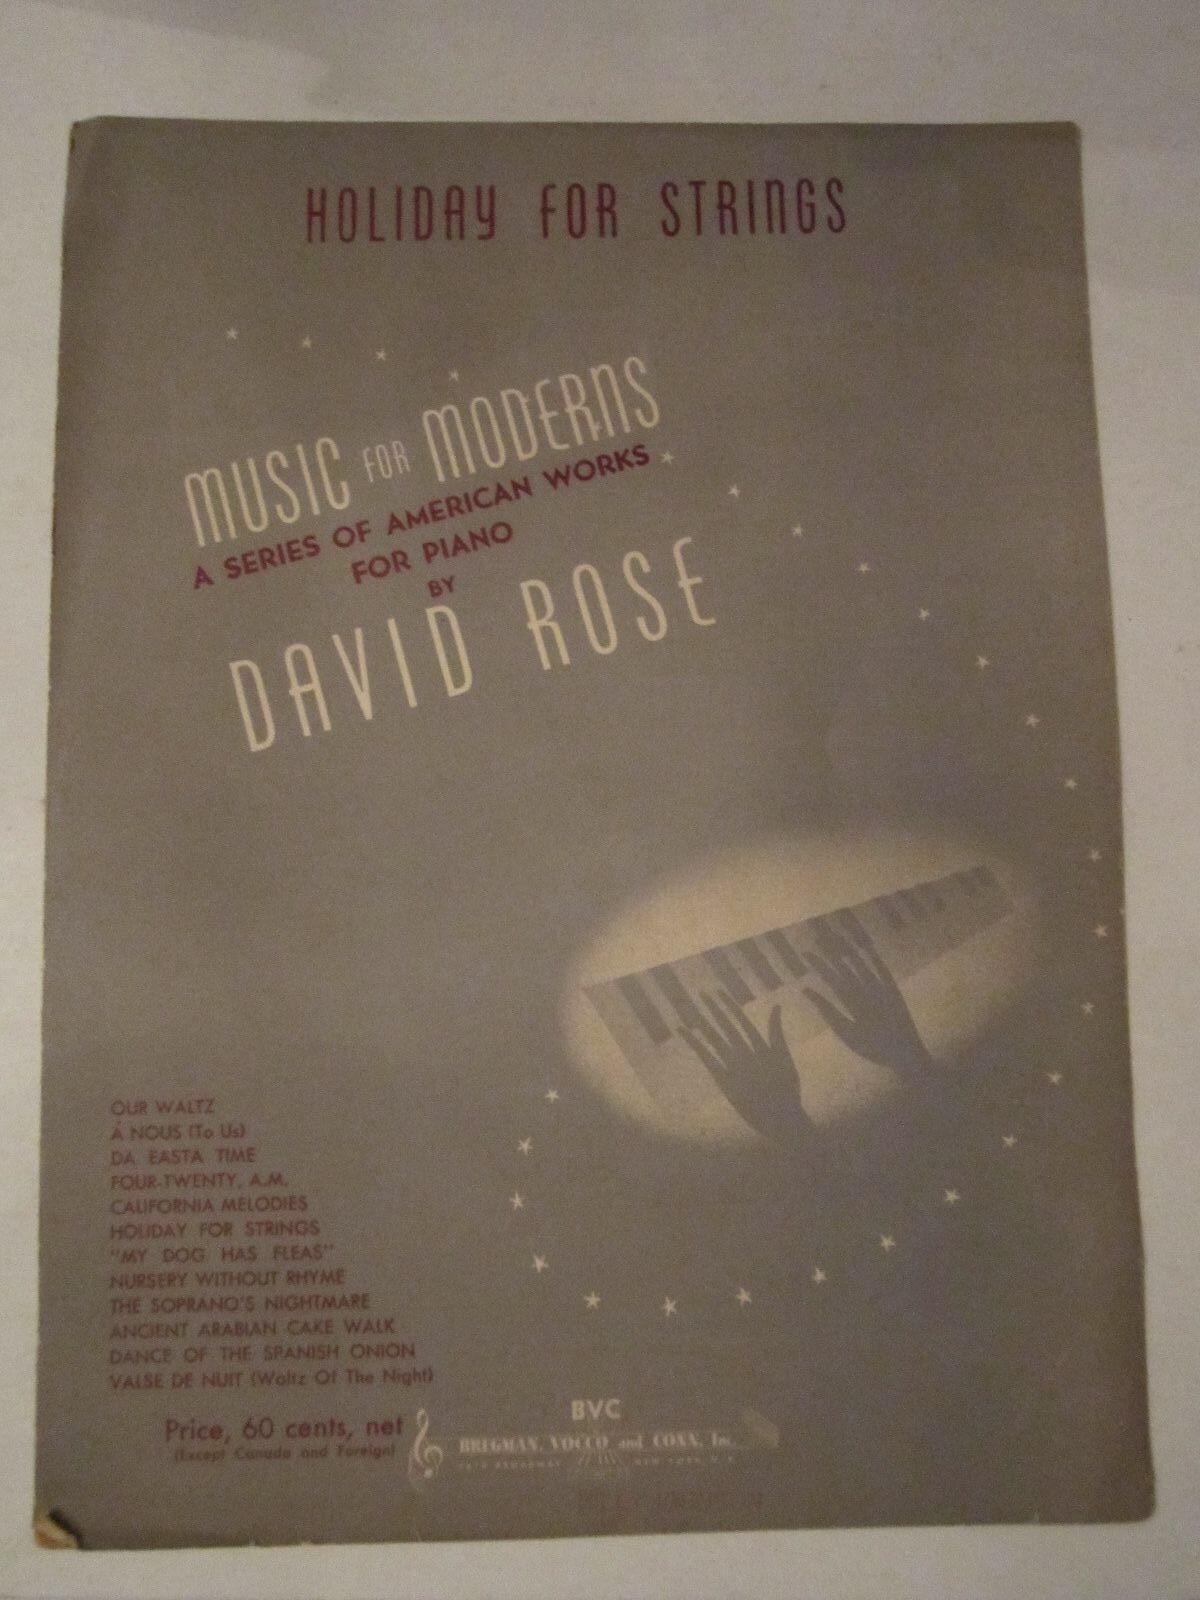 12 VINTAGE MUSIC SHEETS - MOSTLY COVERS WITH SOME MUSIC - #2 - TUB BN-14